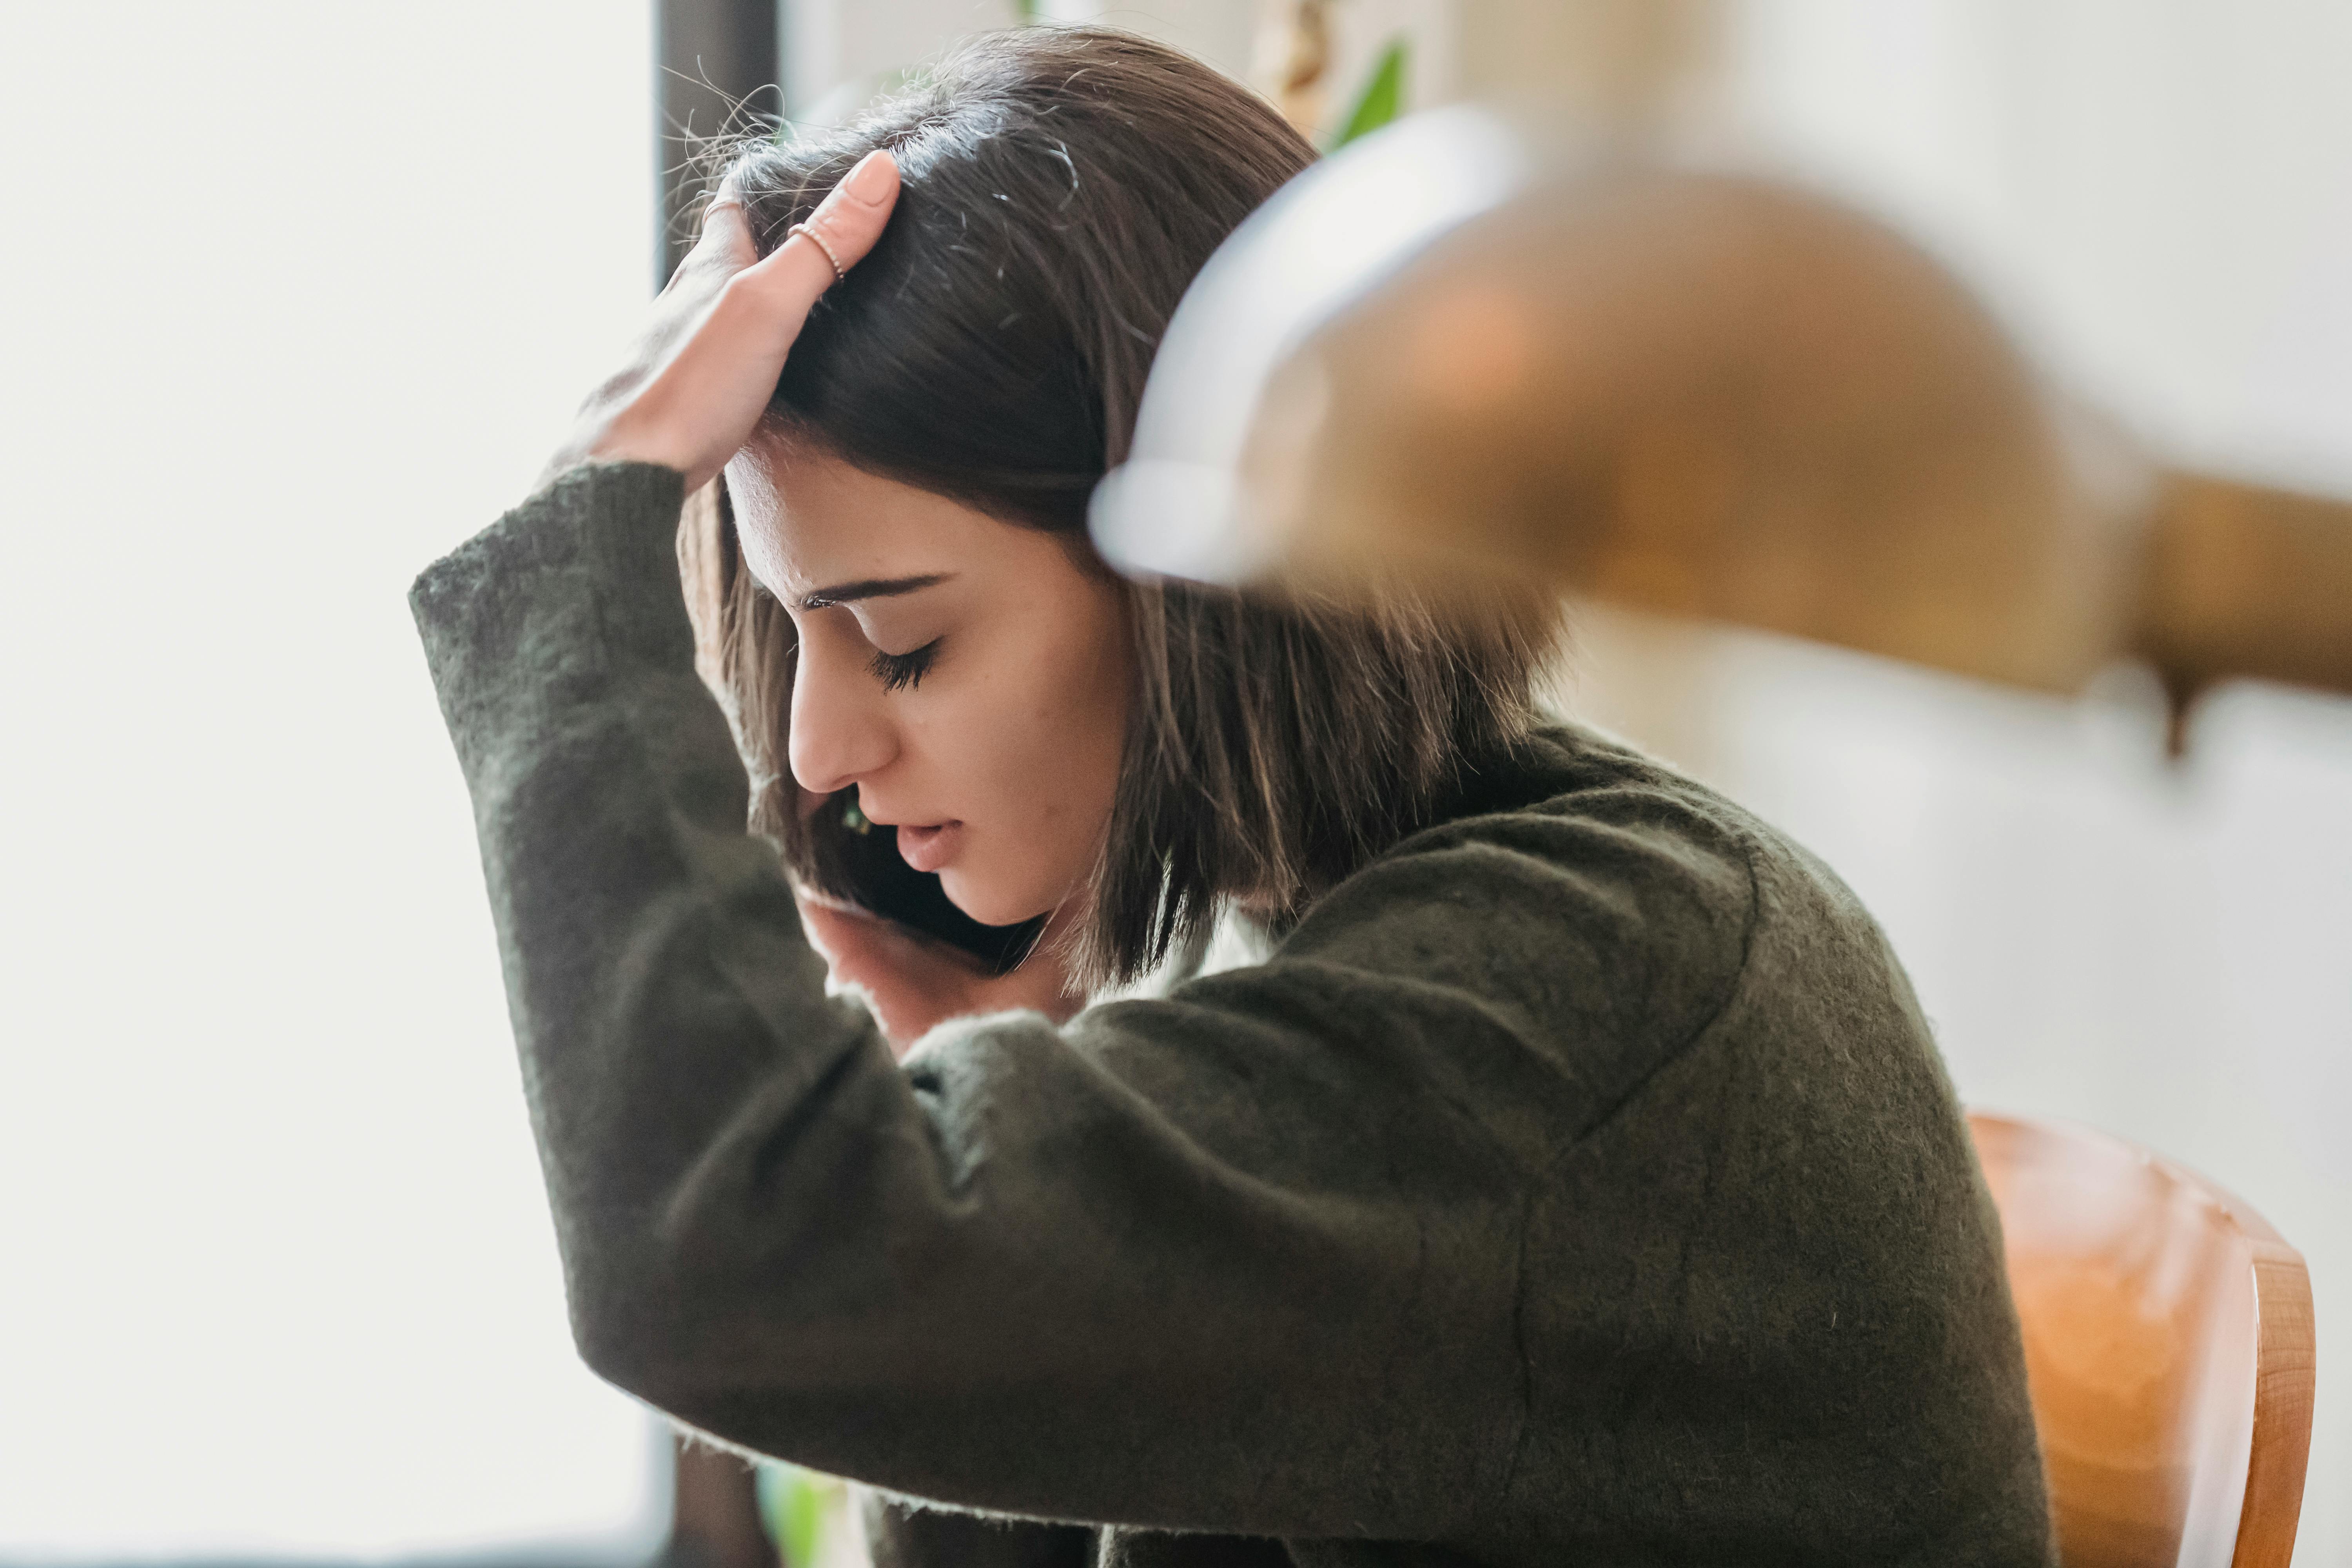 A frustrated woman having a phone call | Source: Pexels